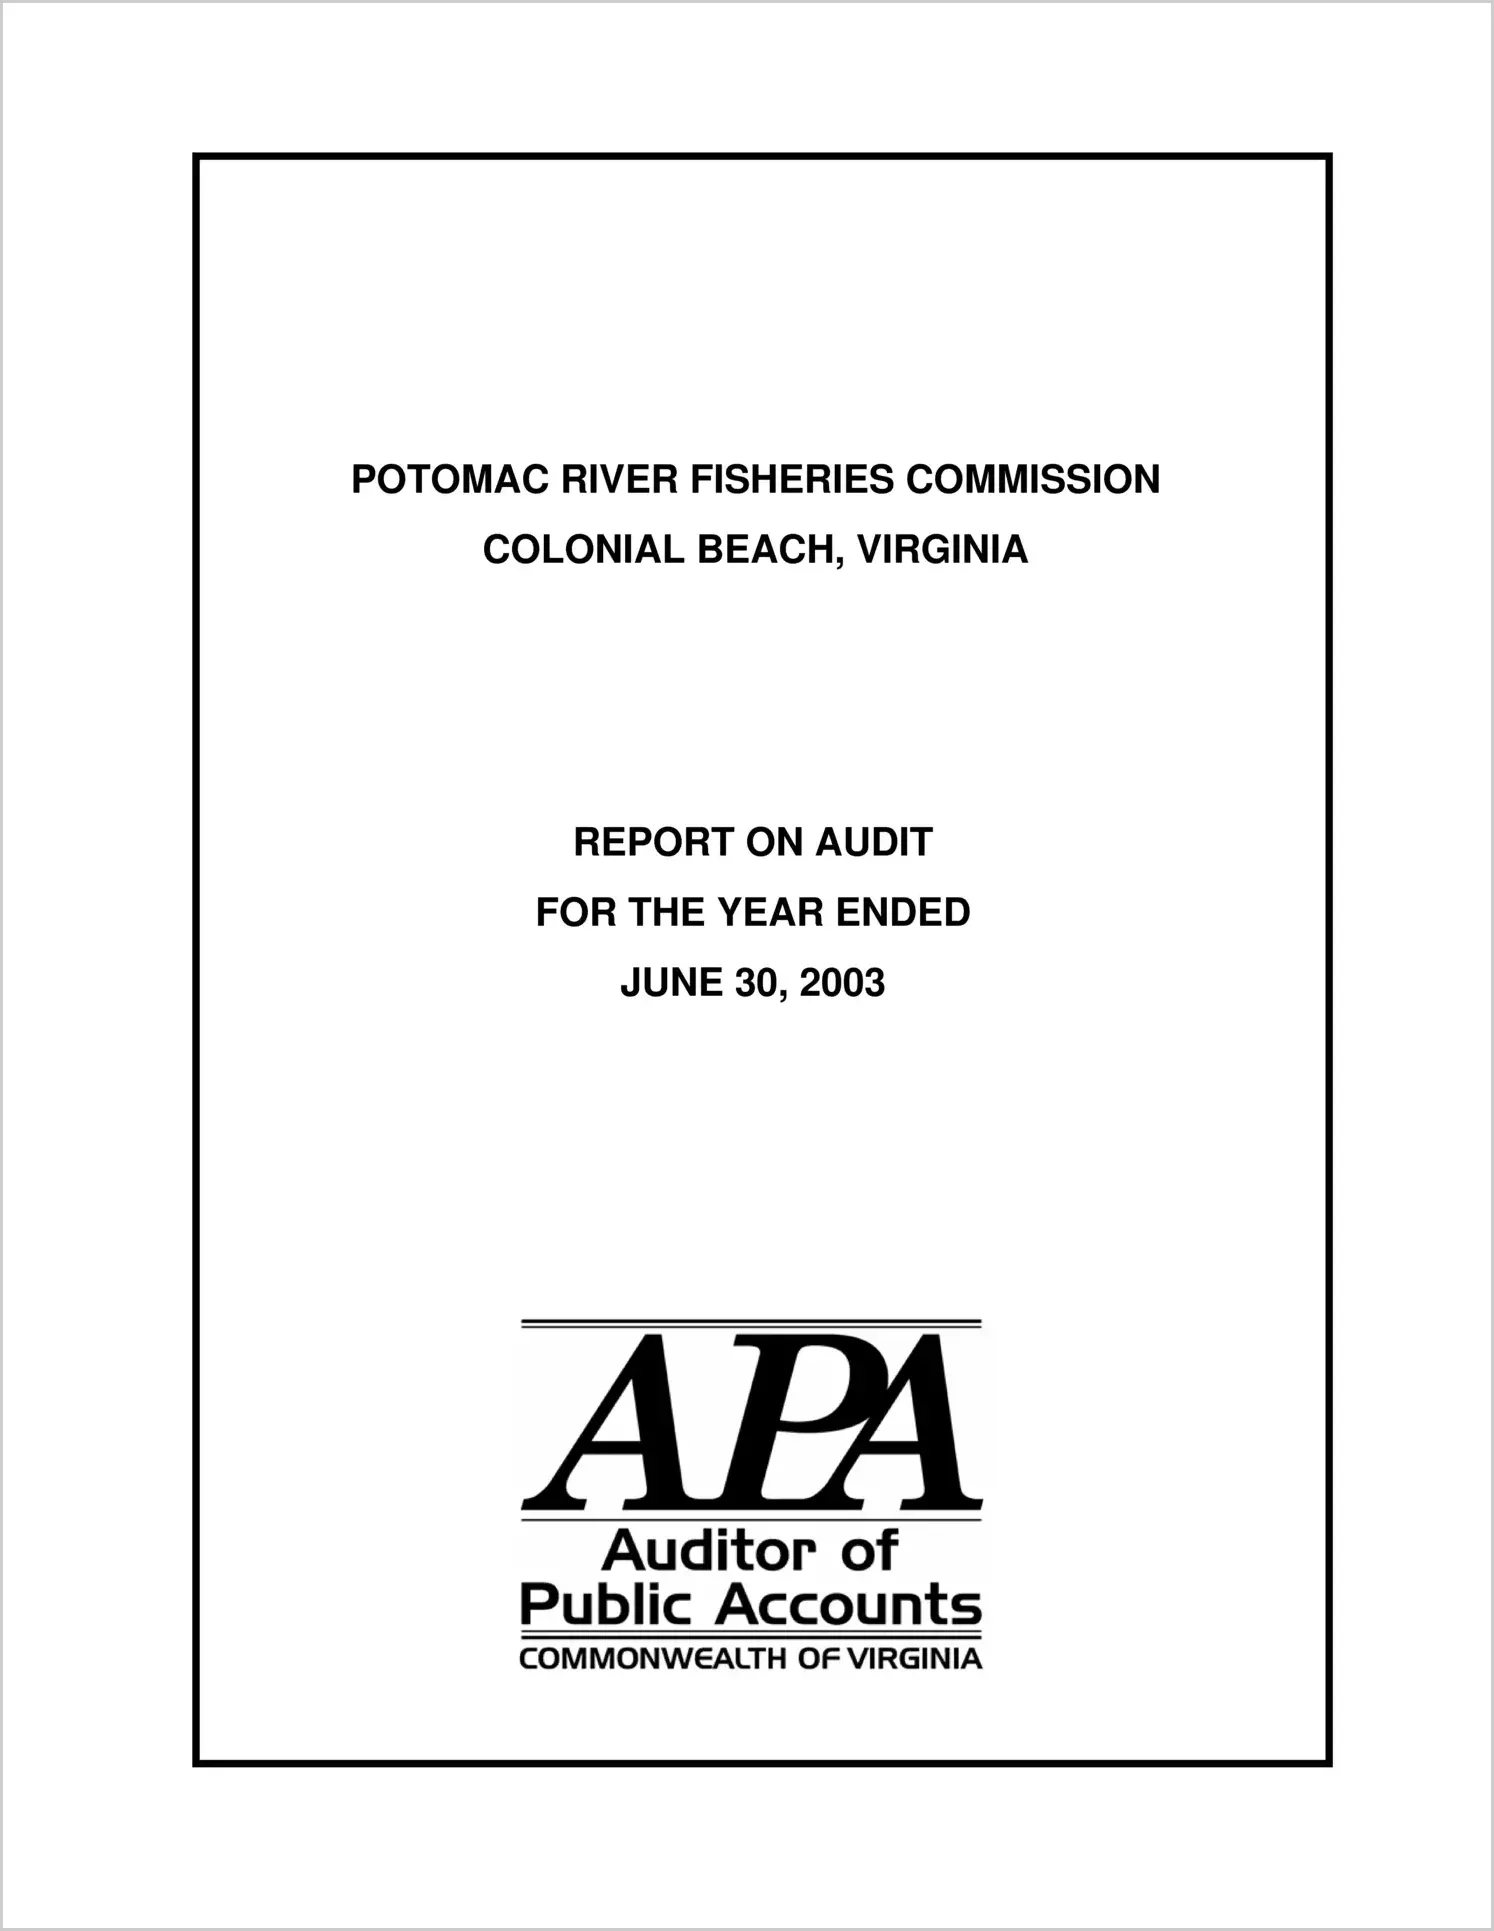 Potomac River Fisheries Commission for the year ended June 30, 2003